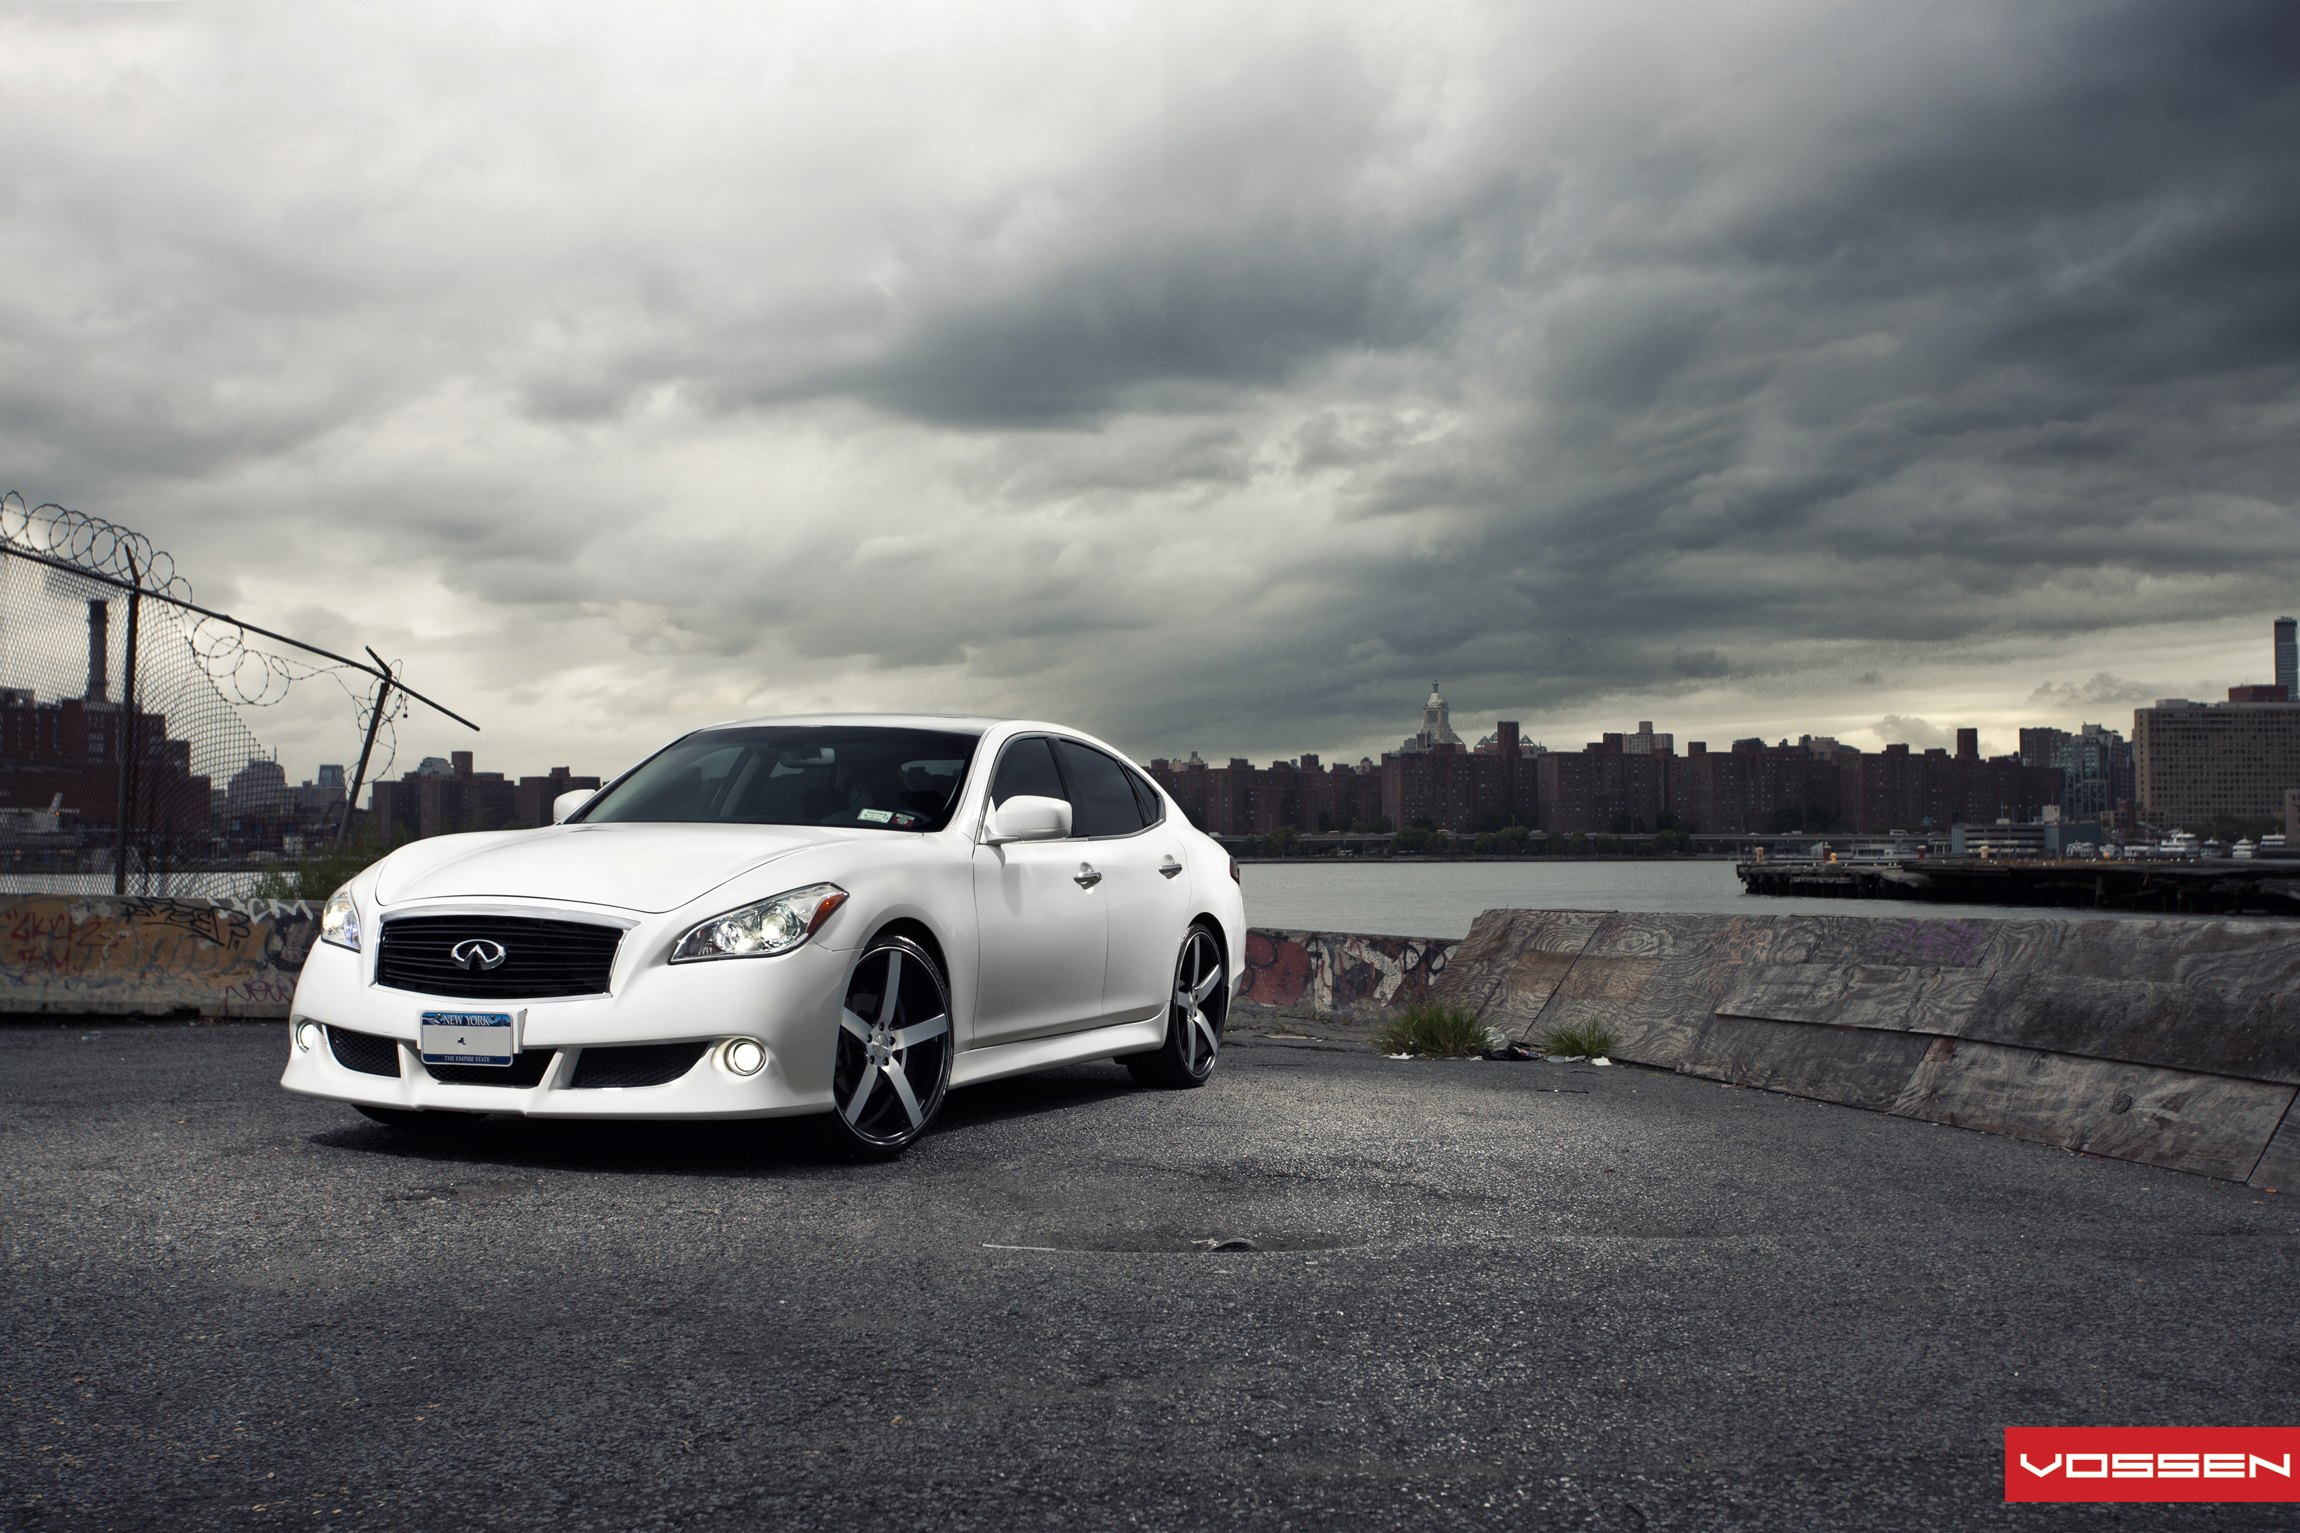 Front Bumper with LED Fog Lights on White Infiniti M37 - Photo by Vossen